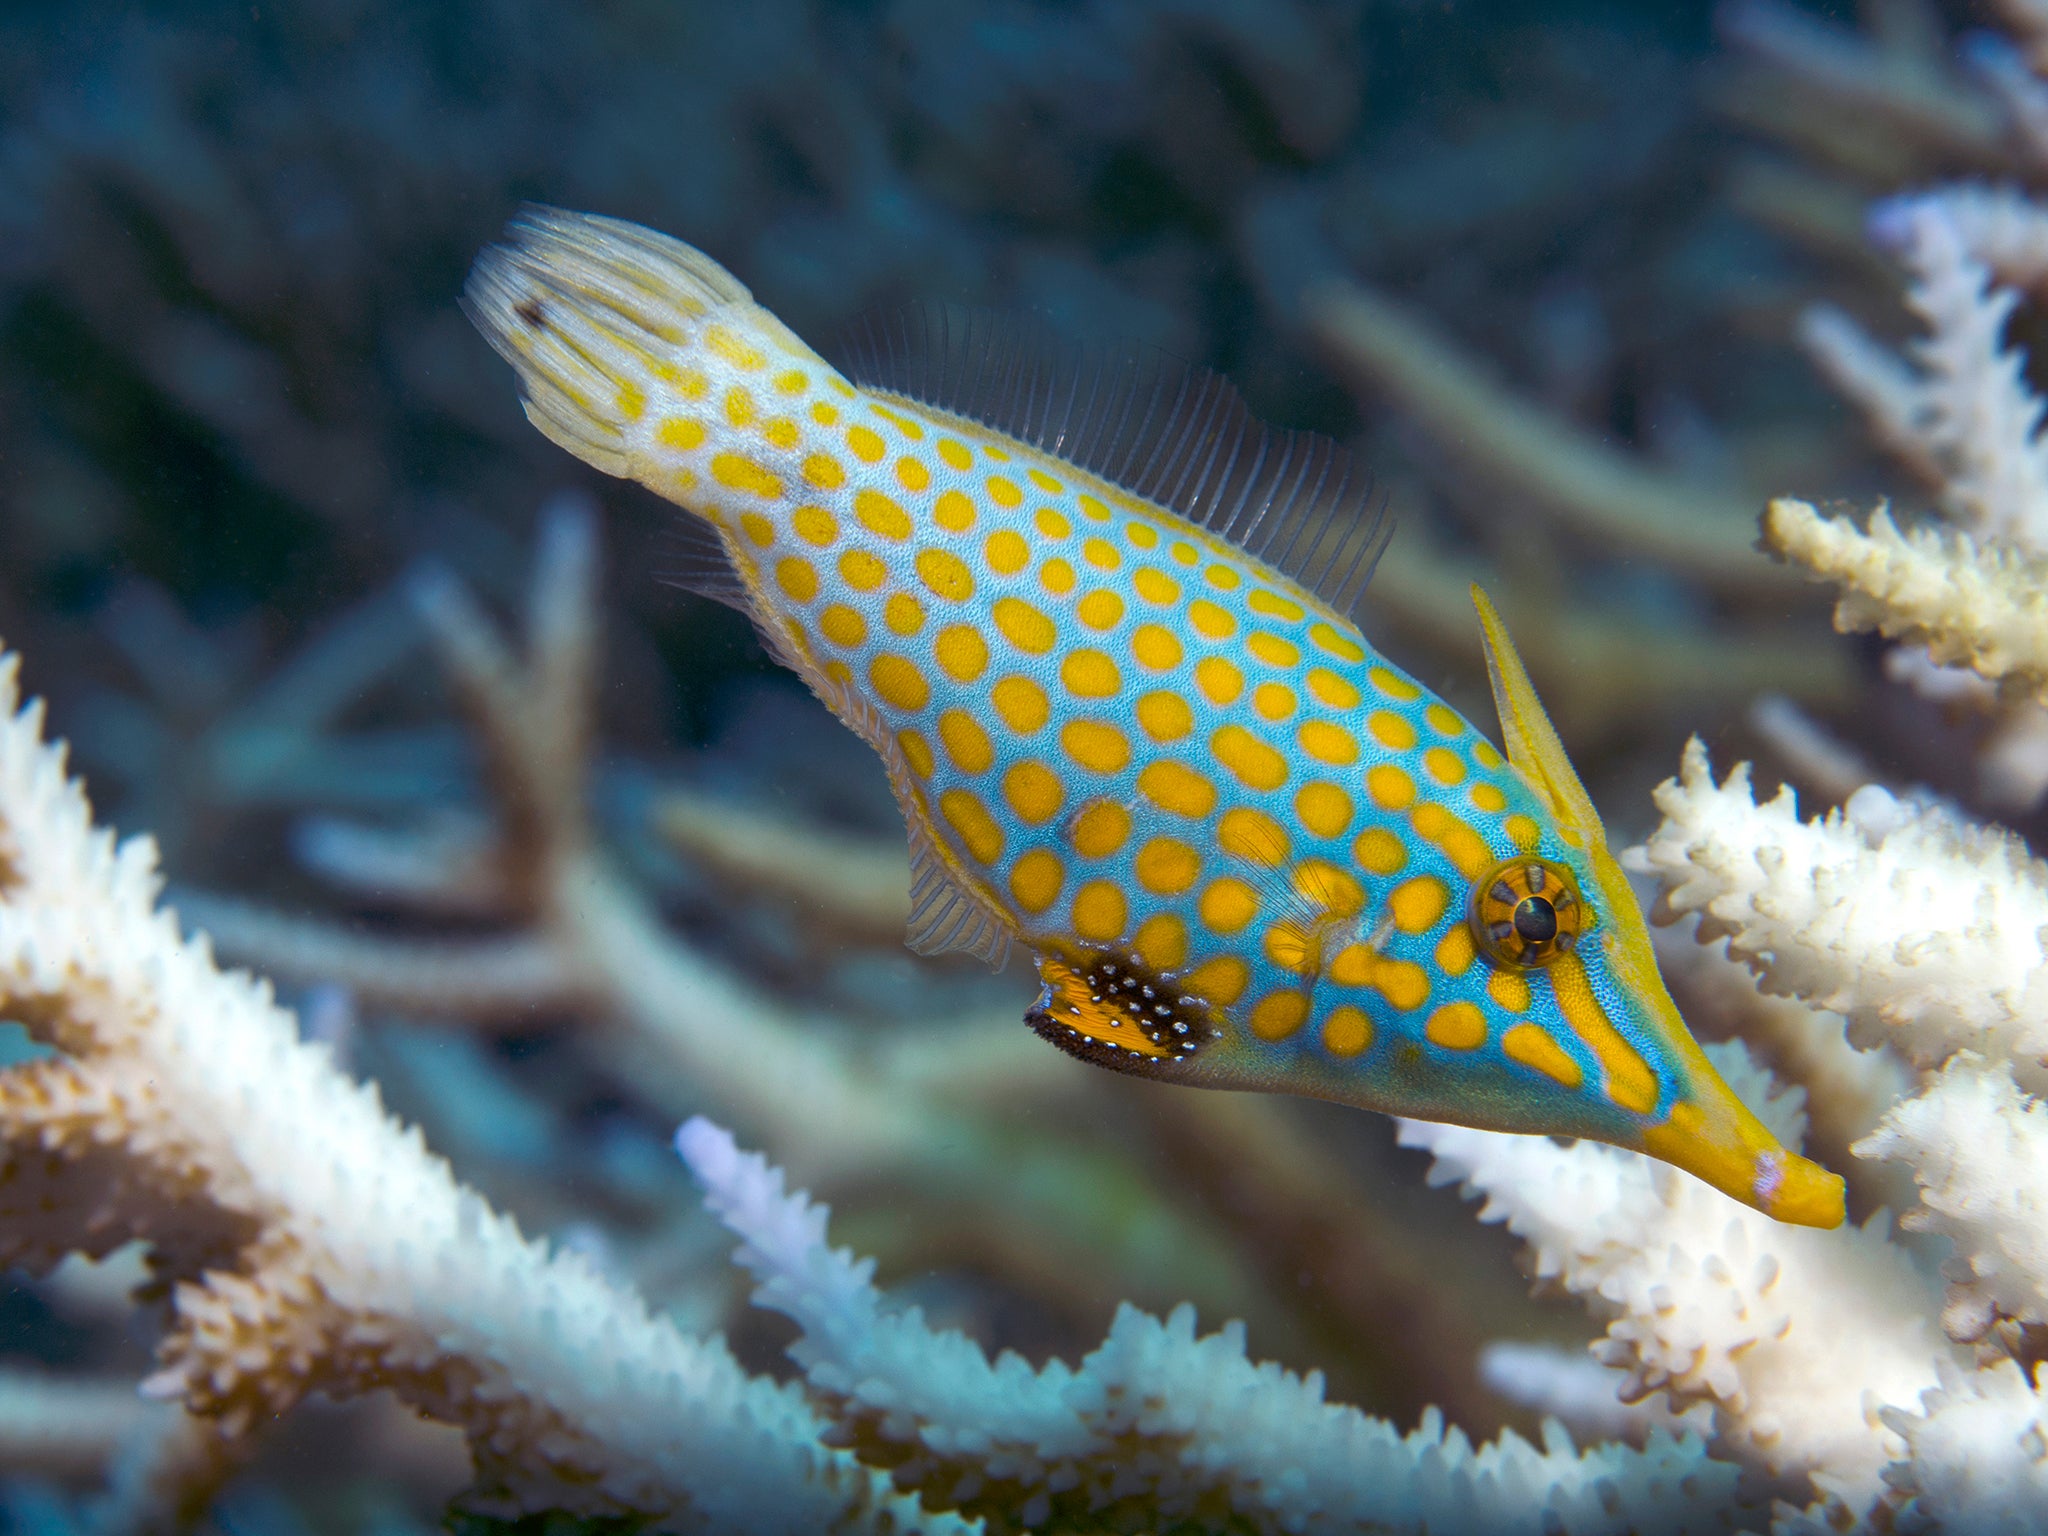 A long-nose file fish struggling to find coral polys to eat. File fish are iconic reef fish that are totally reliant on healthy corals for food